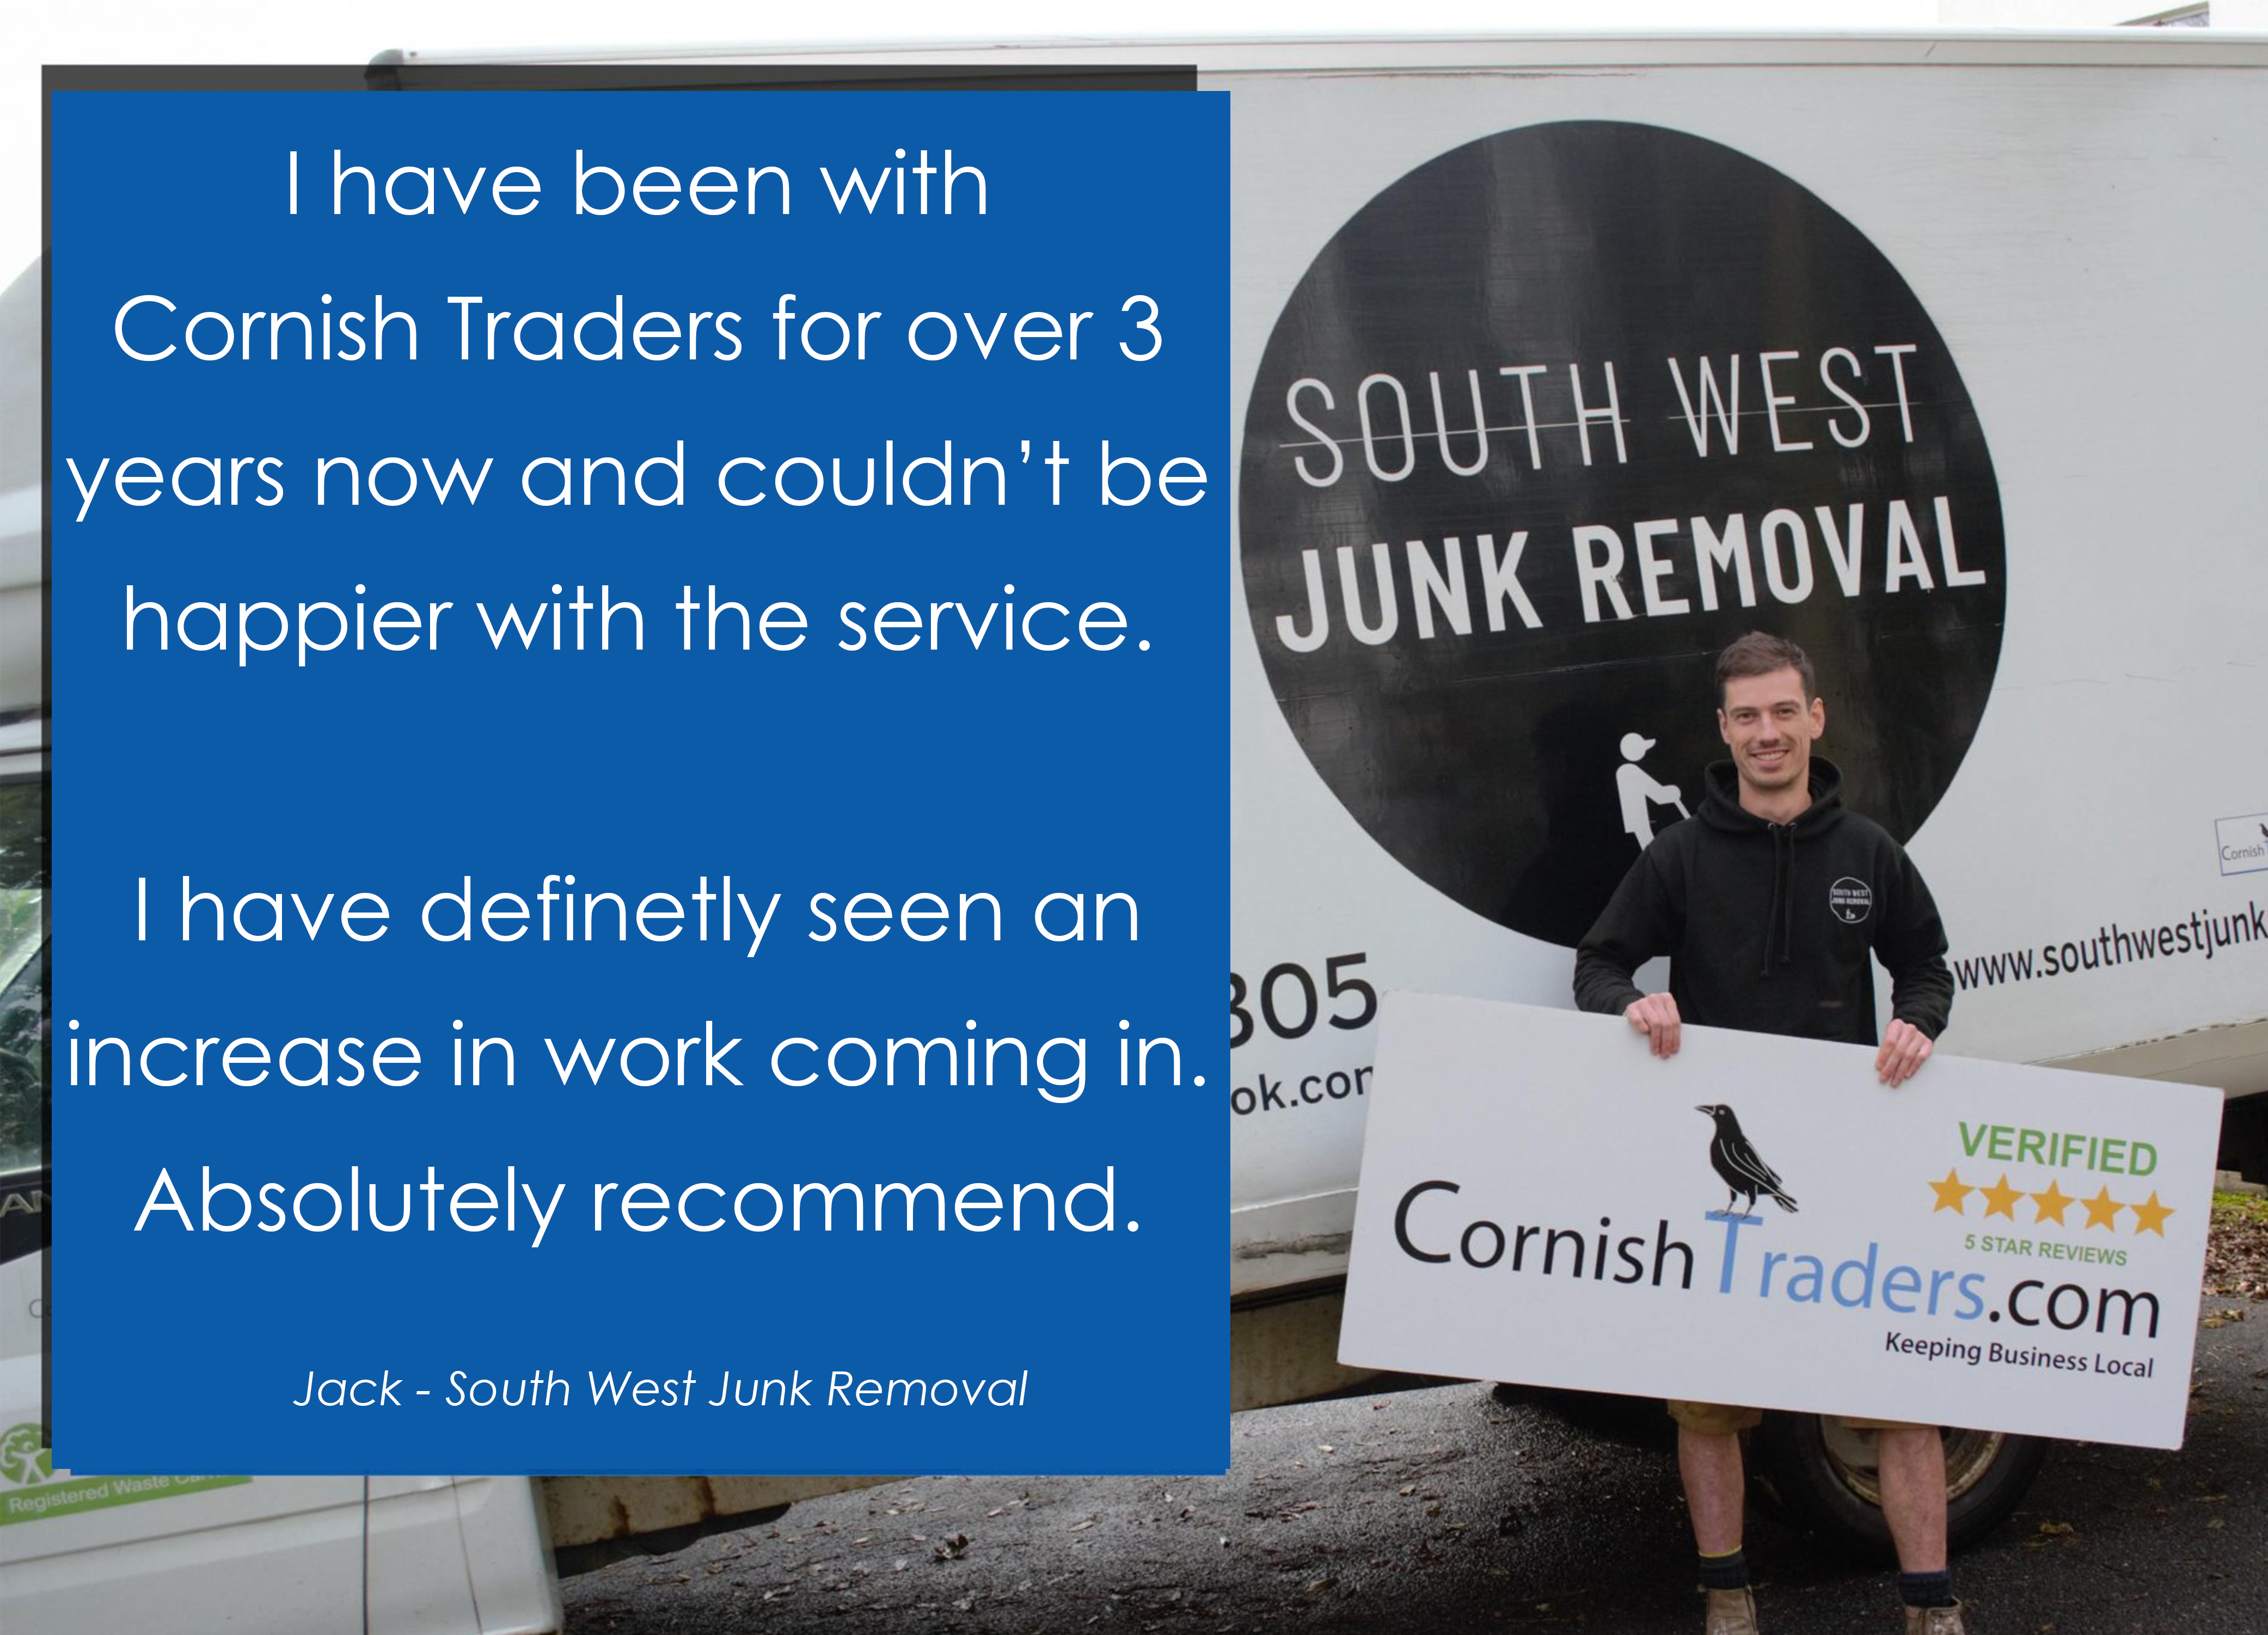 waste removal cornwall,cornish traders,ct verified